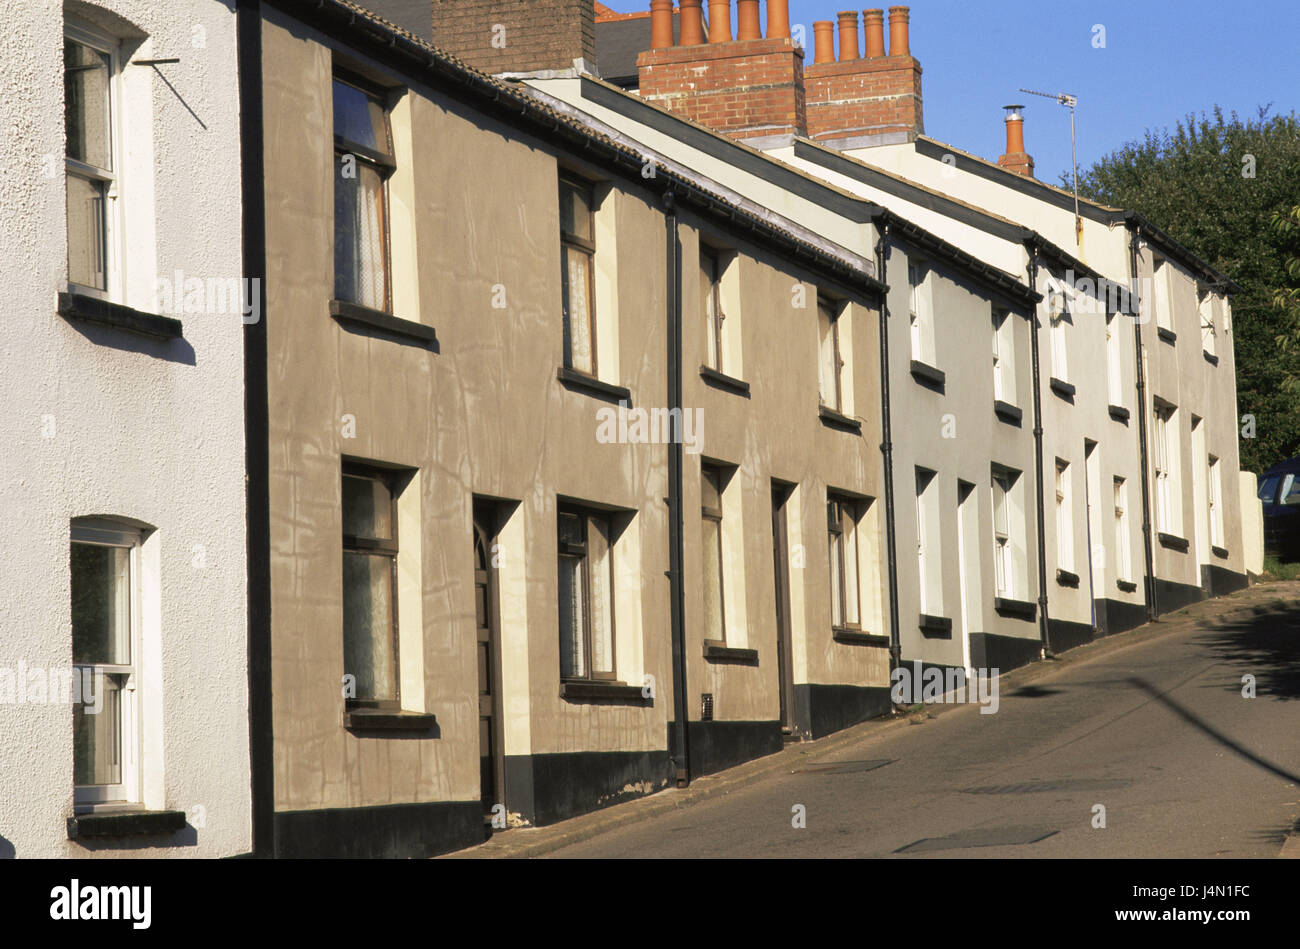 Great Britain, Wales, Monmouthshire, Blaenavon, terrace, houses, residential houses, facades, simply, simply, simple, living, rent, deserted, Stock Photo